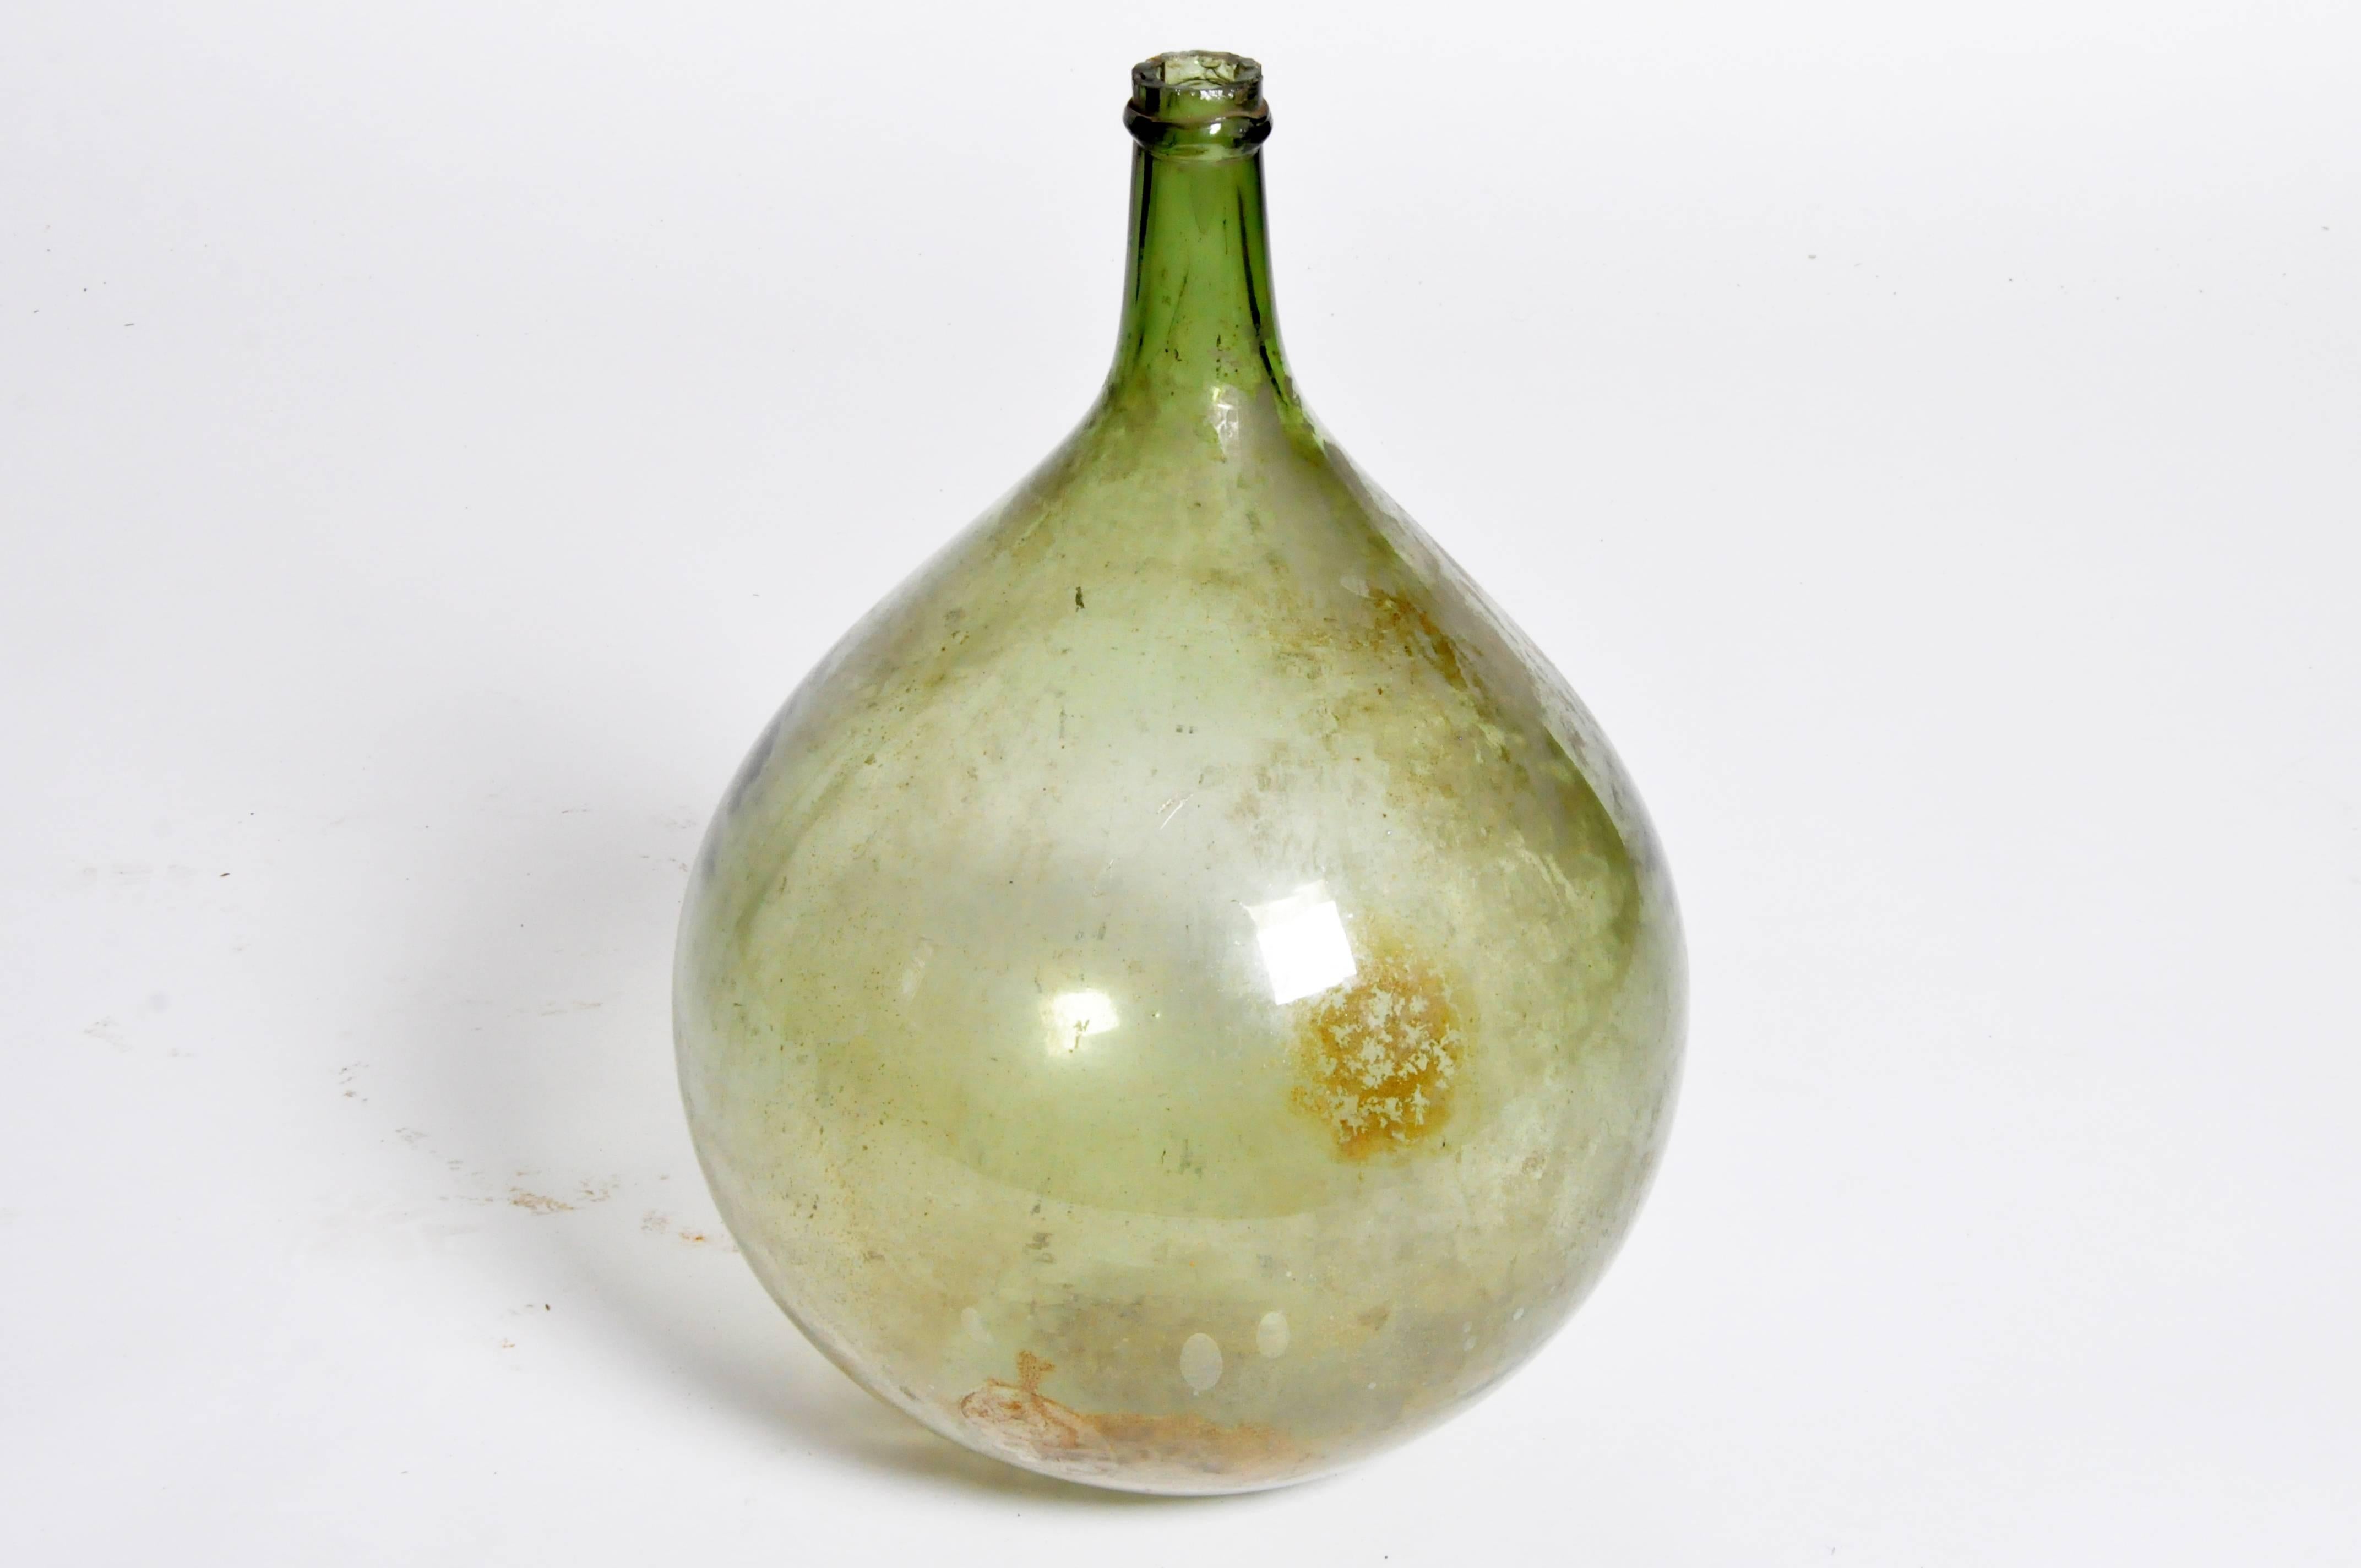 This olive jar is from Spain and is made from handblown glass, circa 19th century.